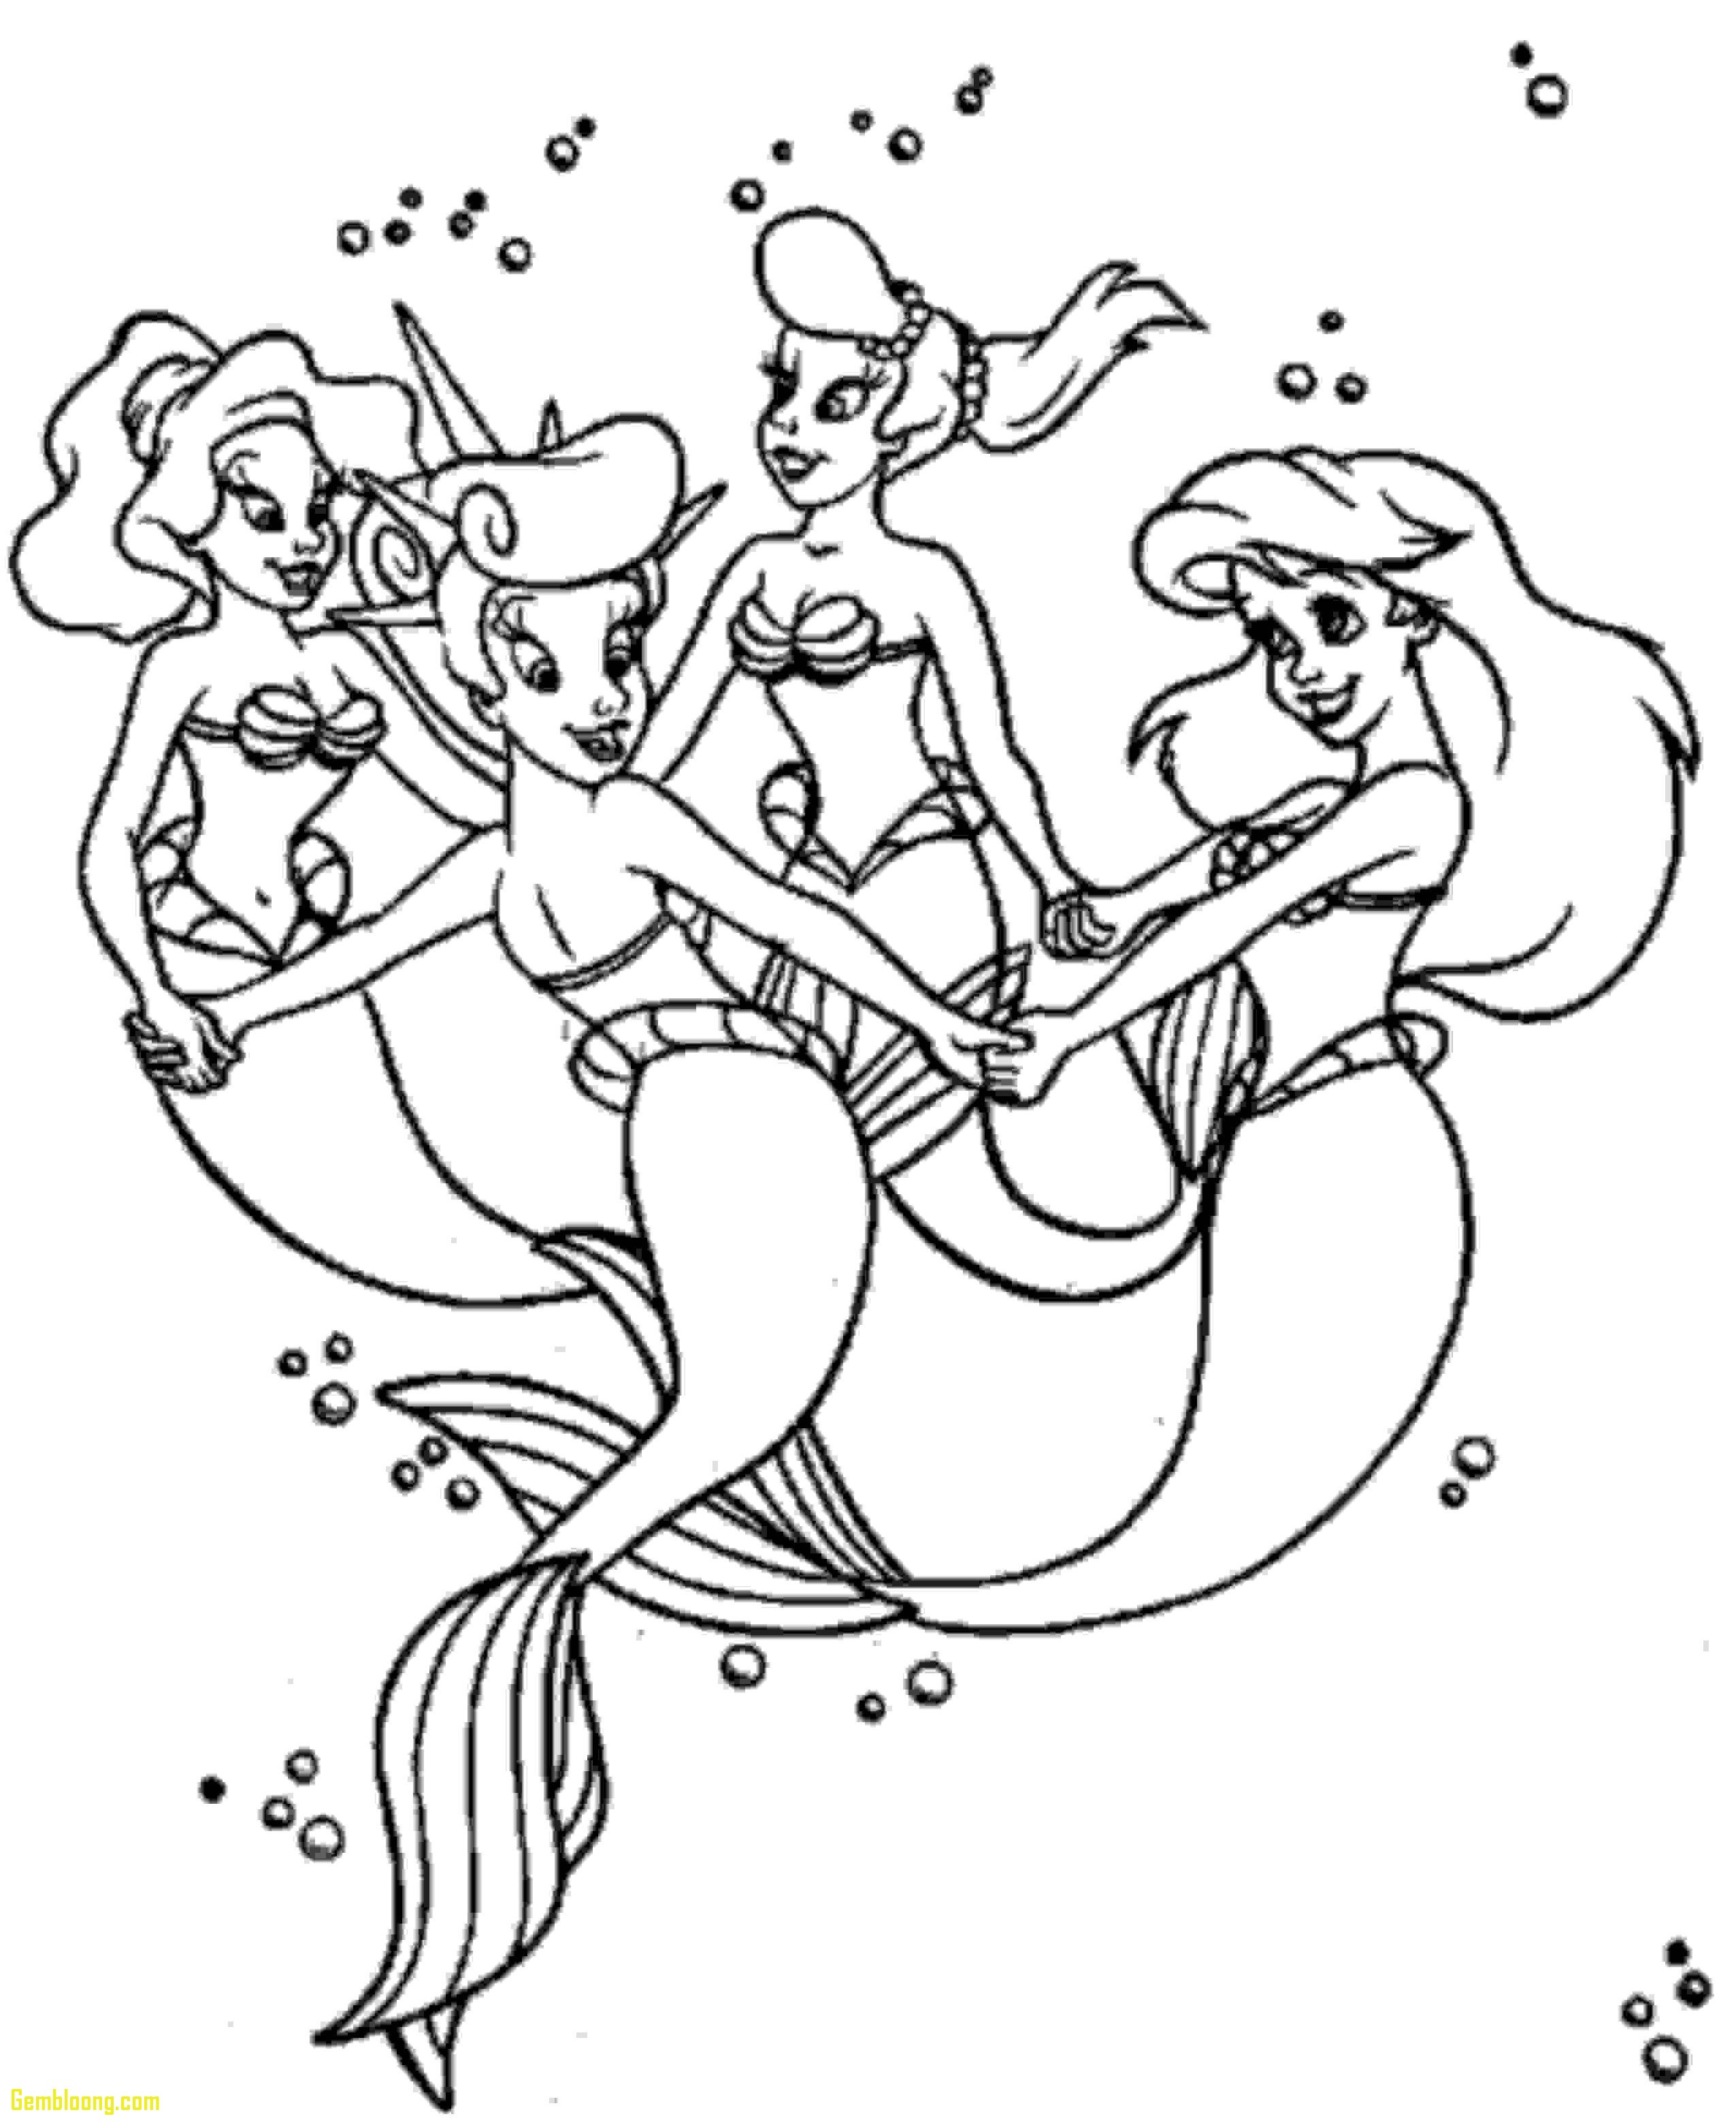 Little Mermaid Flounder Coloring Pages at GetColorings.com   Free ...